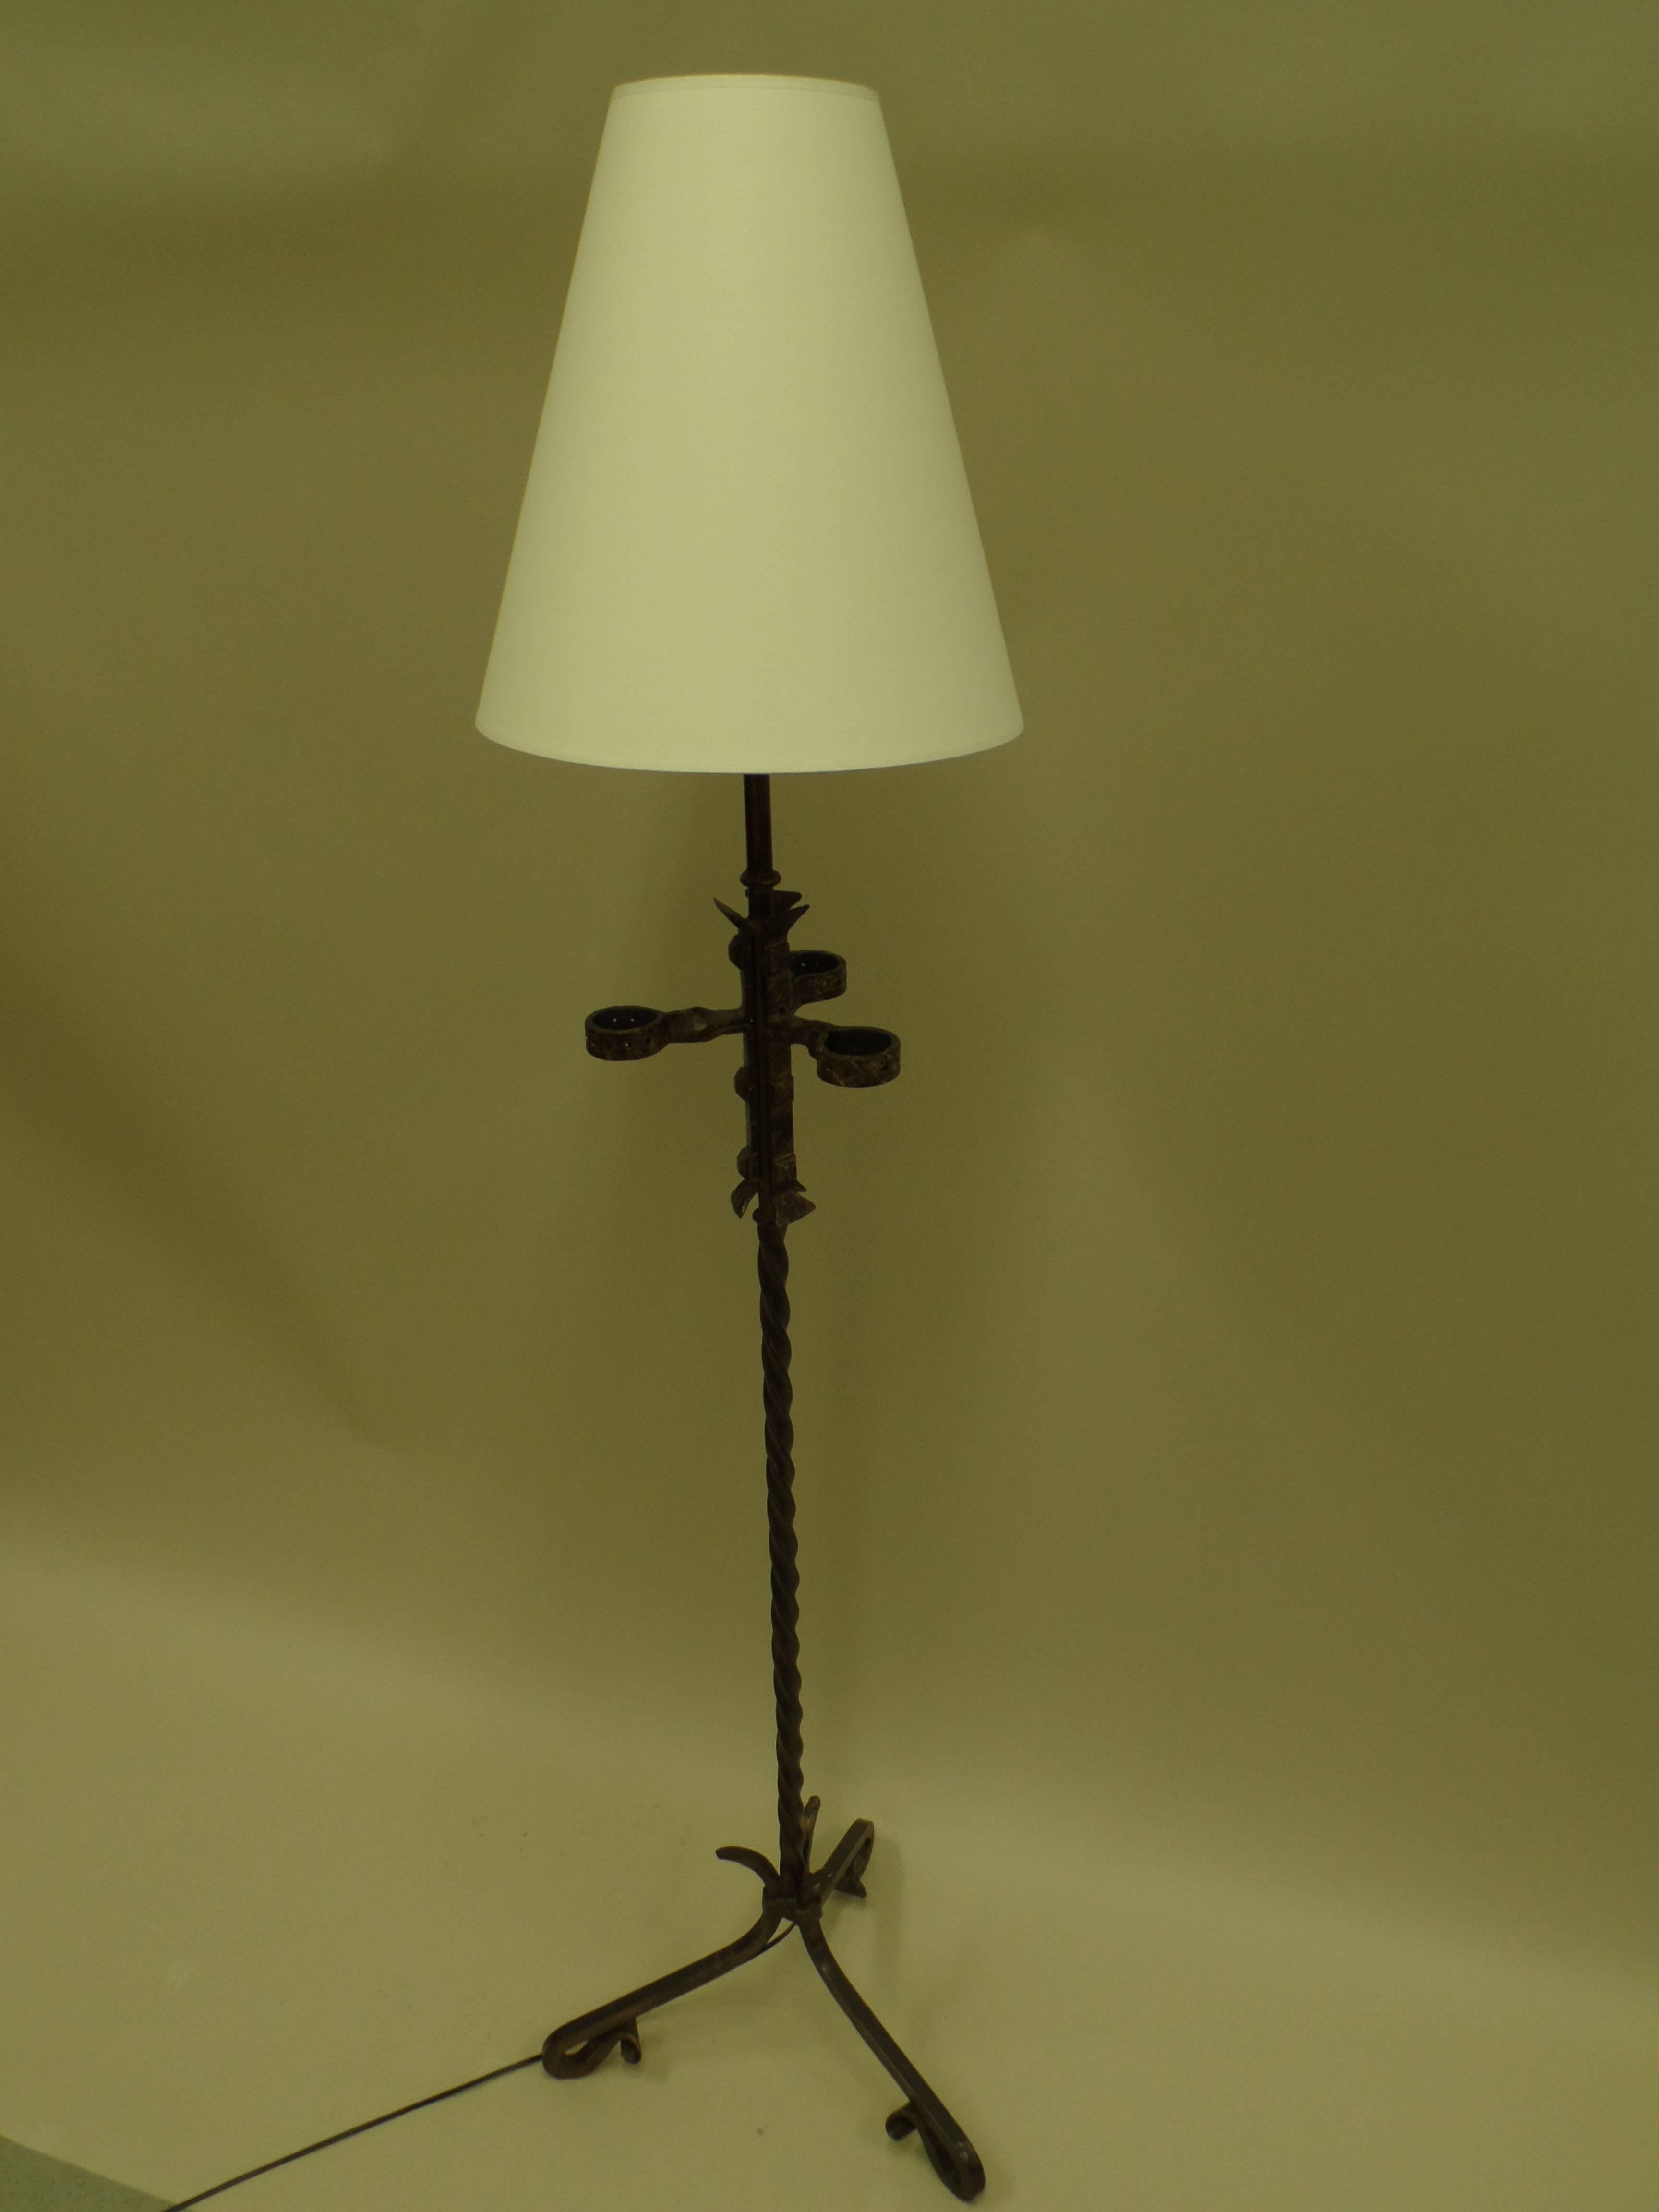 Pair of dramatic, modern Neo-Gothic influence standing lamps with an open trefoil pattern in delicately hammered wrought iron

Shades are for demonstration purposes only. Sold by the pair.